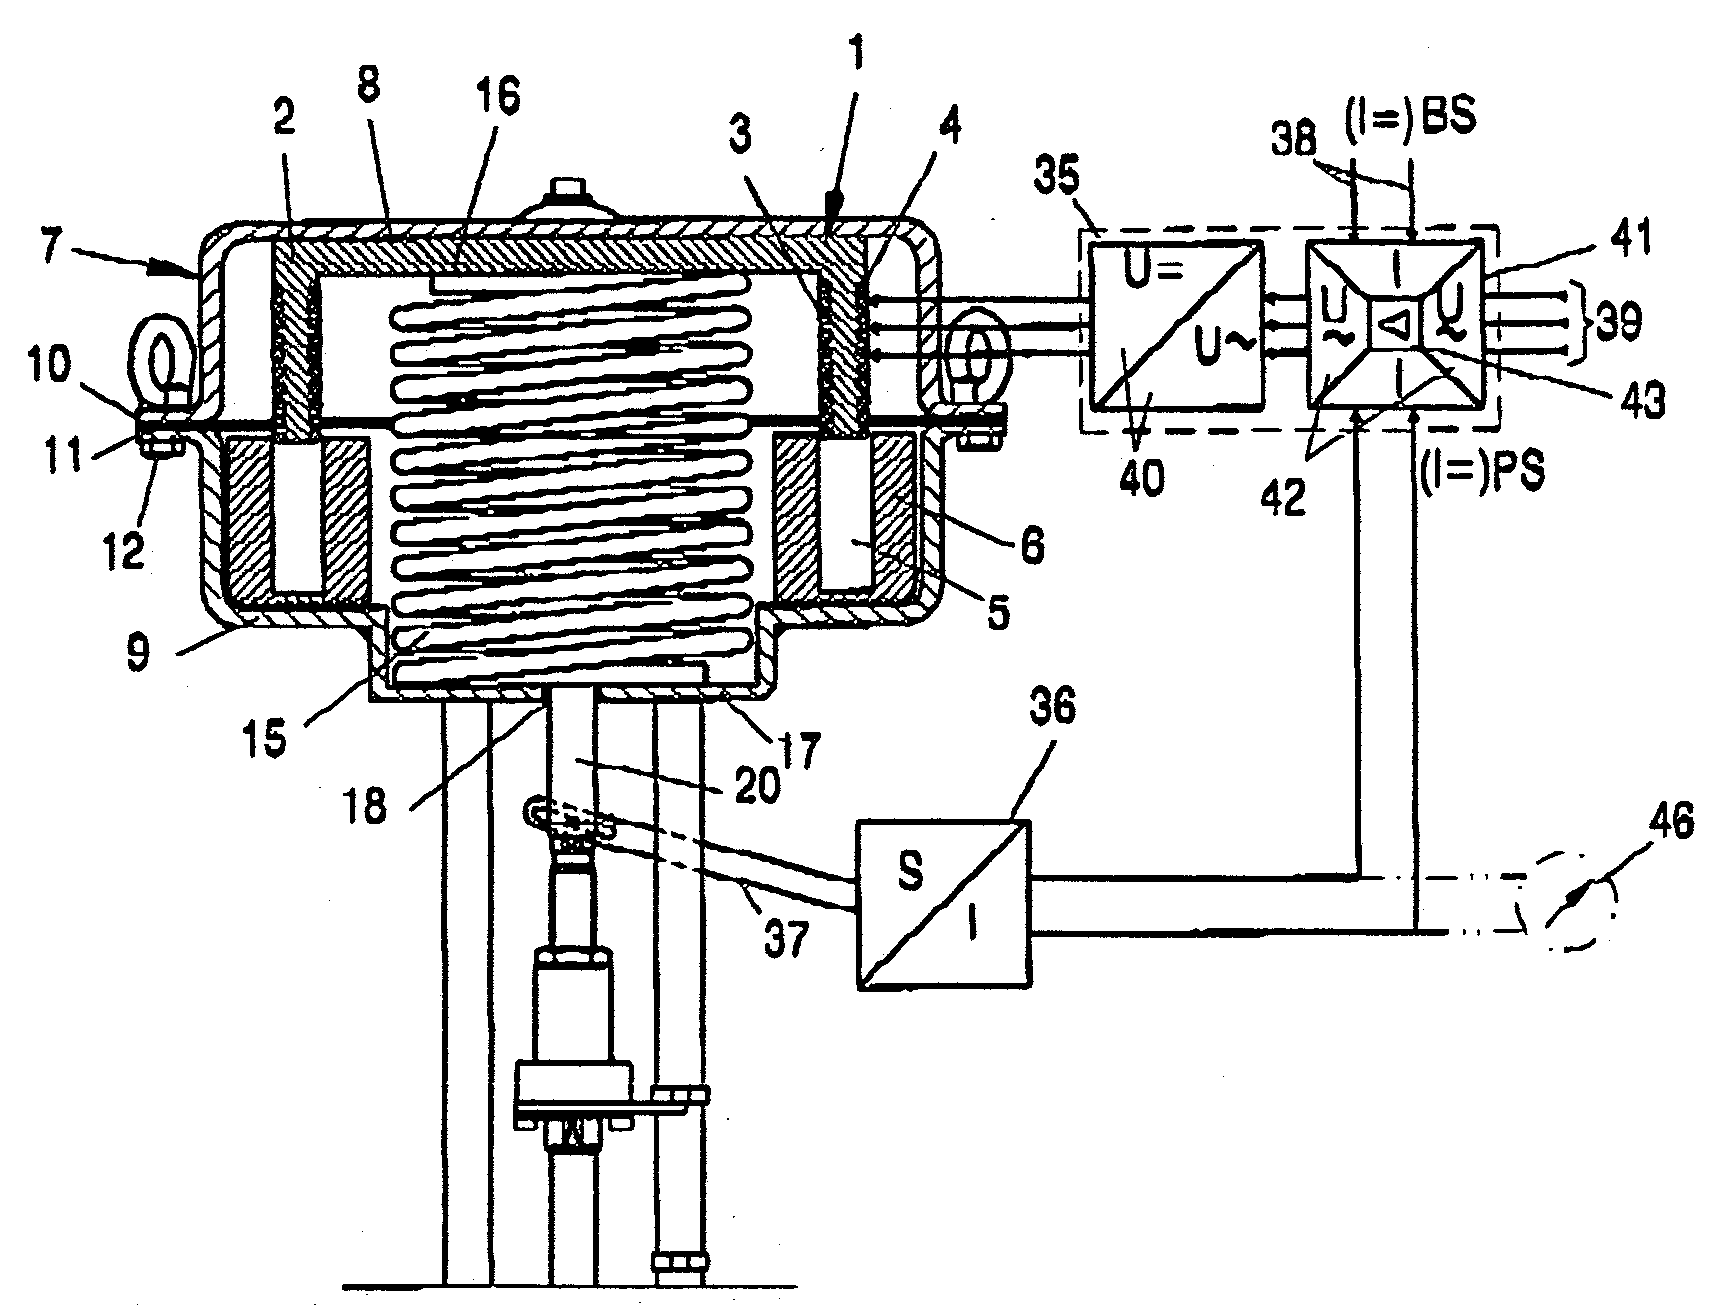 Actuator for control valves and/or shut-off devices